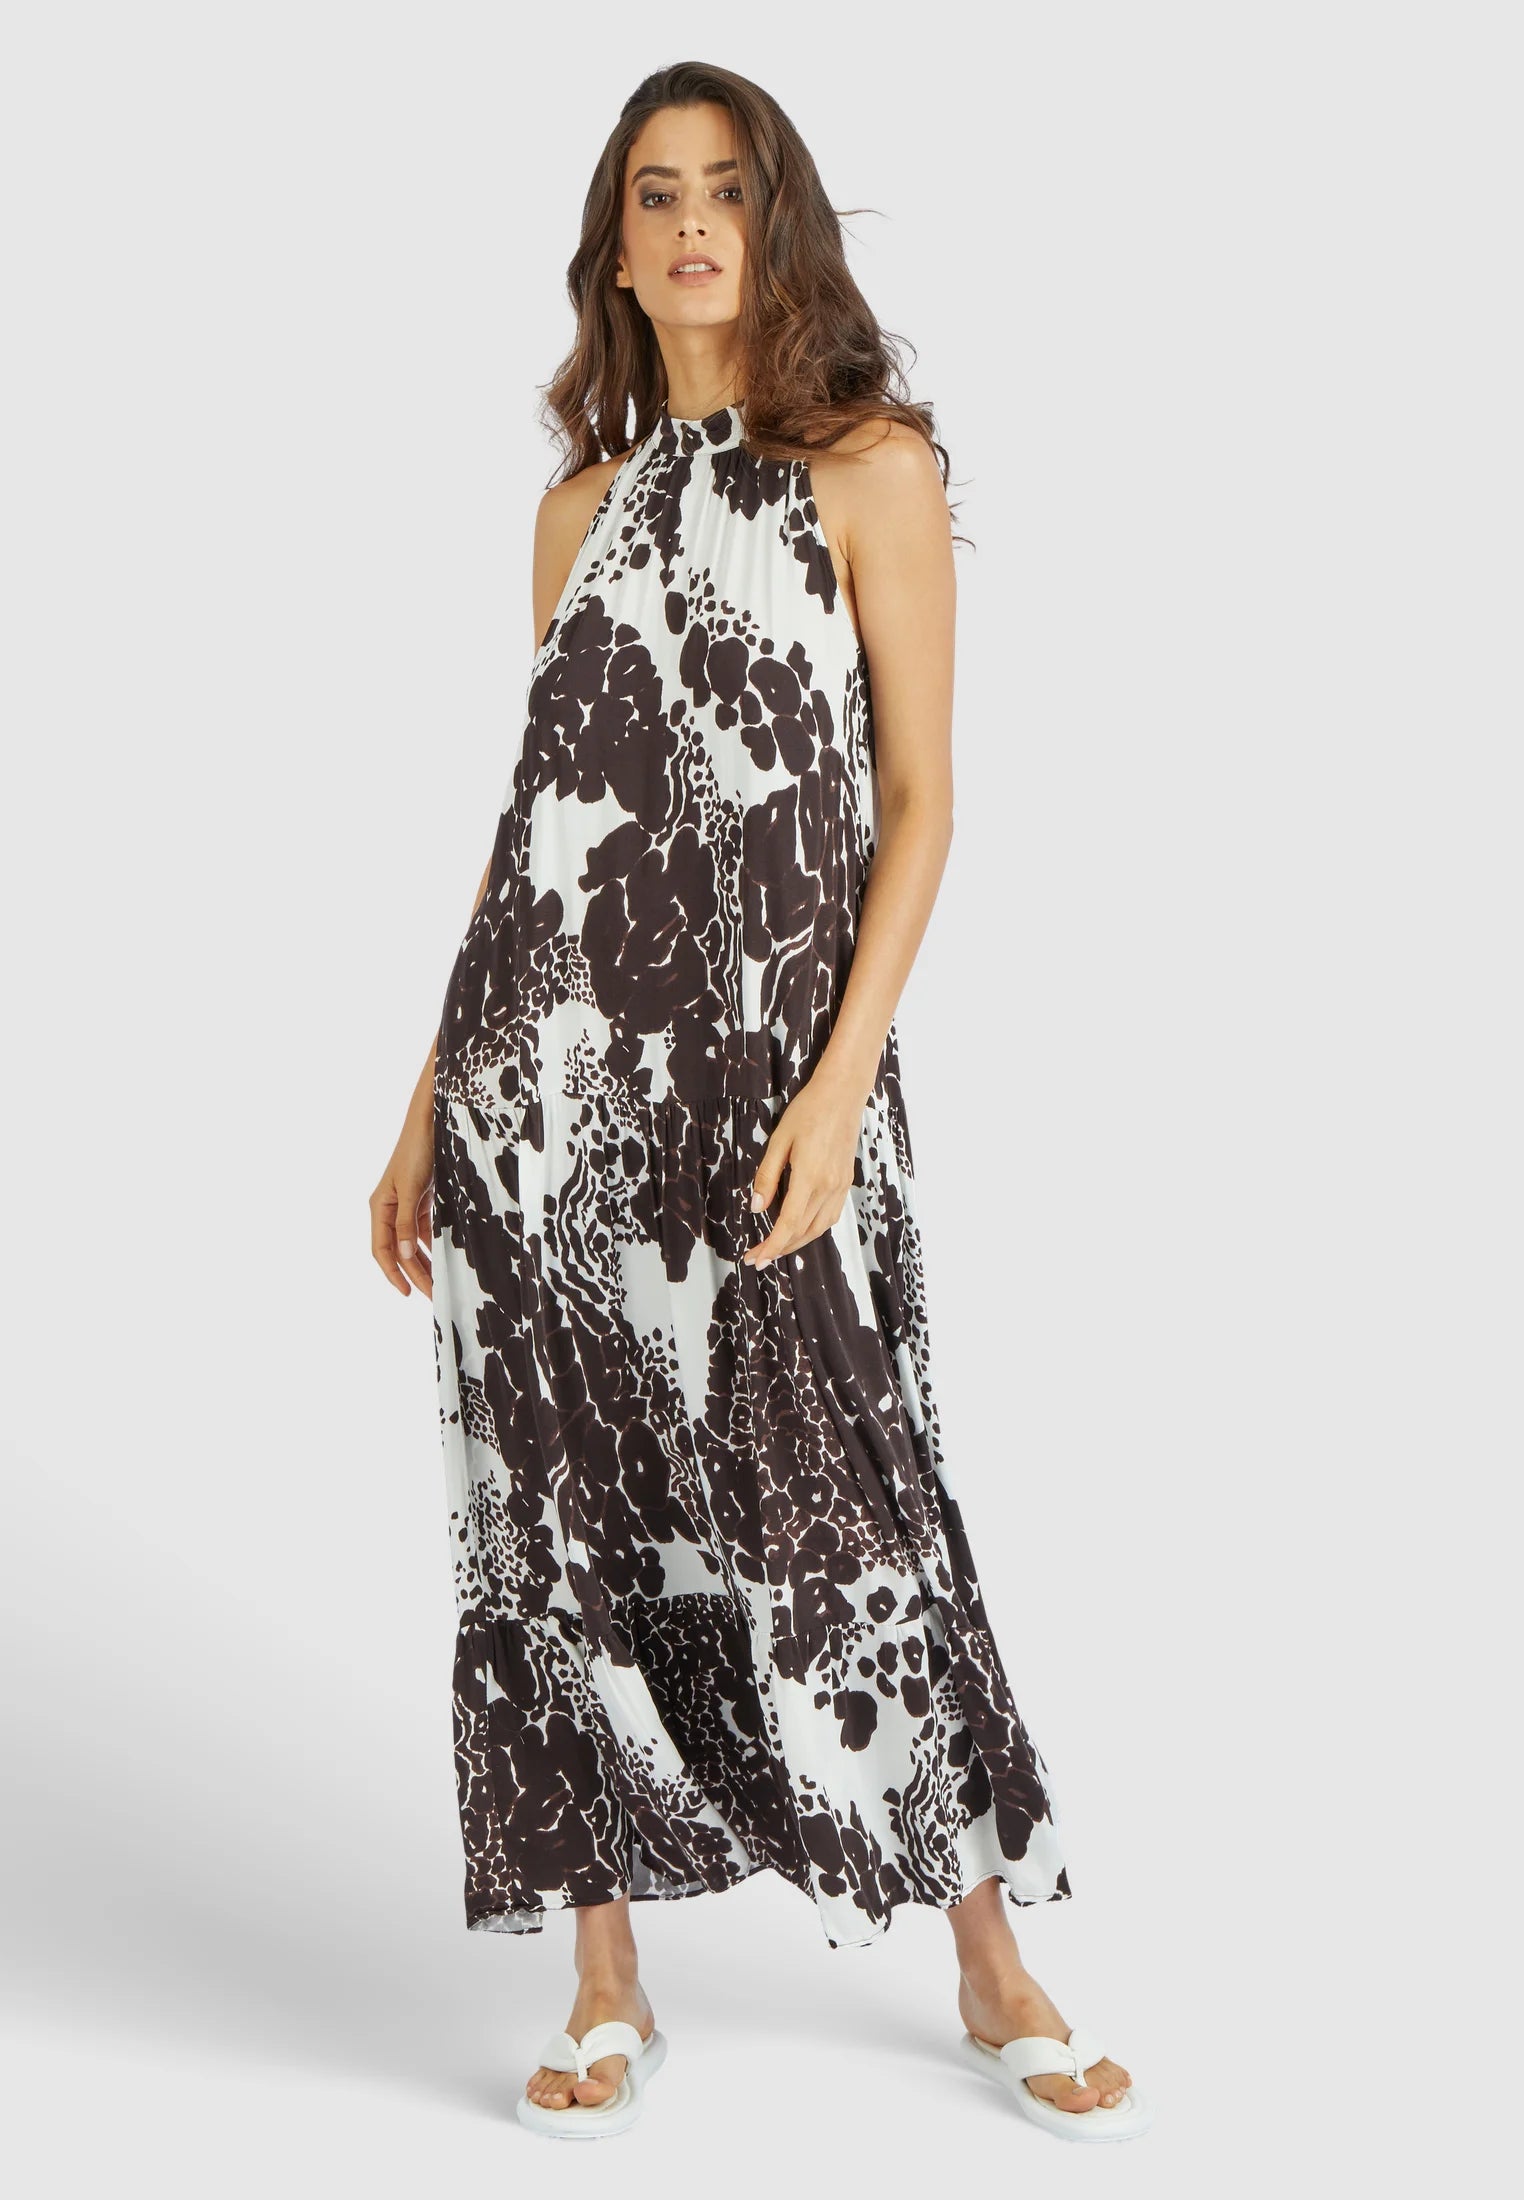 MARC AUREL MAXI DRESS AND ABSTRACT FLOWER PRINT IN HOT ESPRESSO